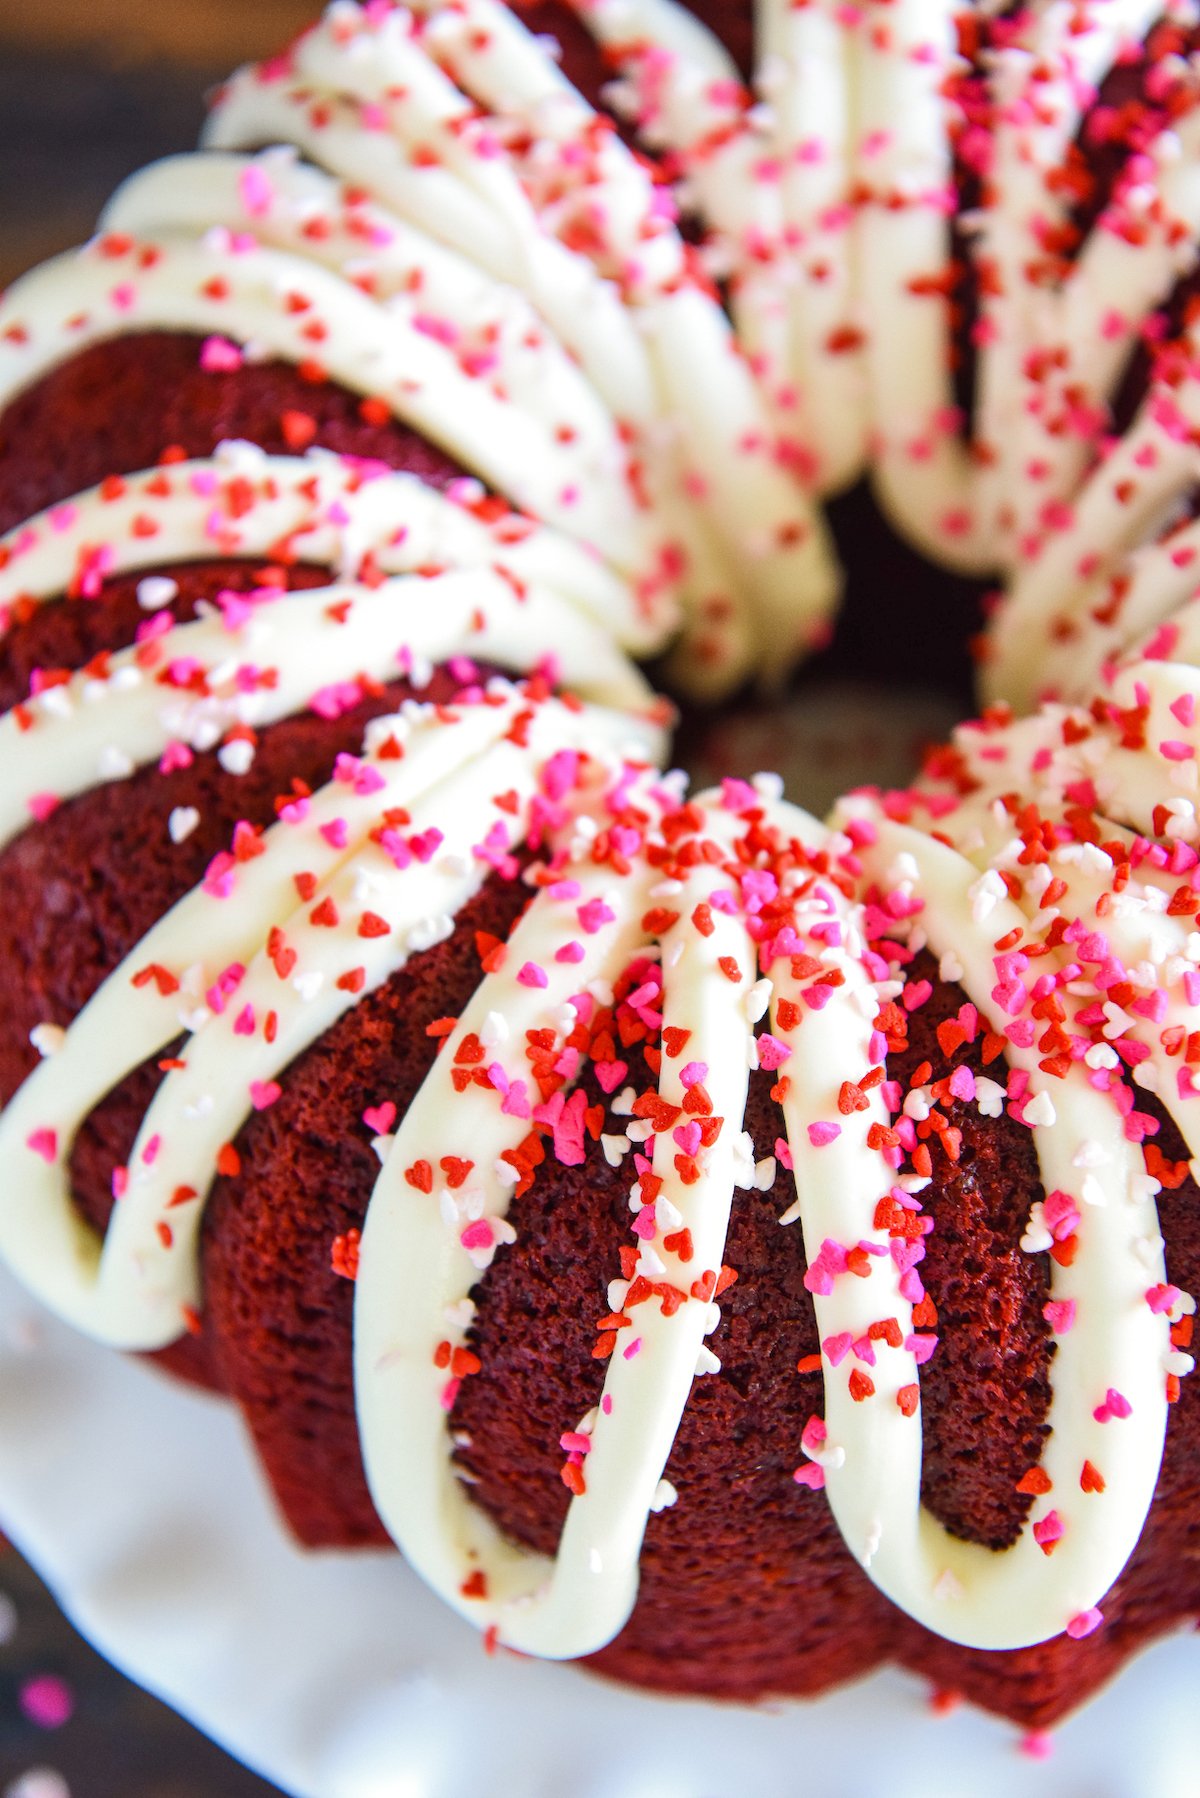 Red, white and pink sprinkles sprinkled on top of cream cheese icing drizzled on top of a red velvet bundt cake on a cake stand.